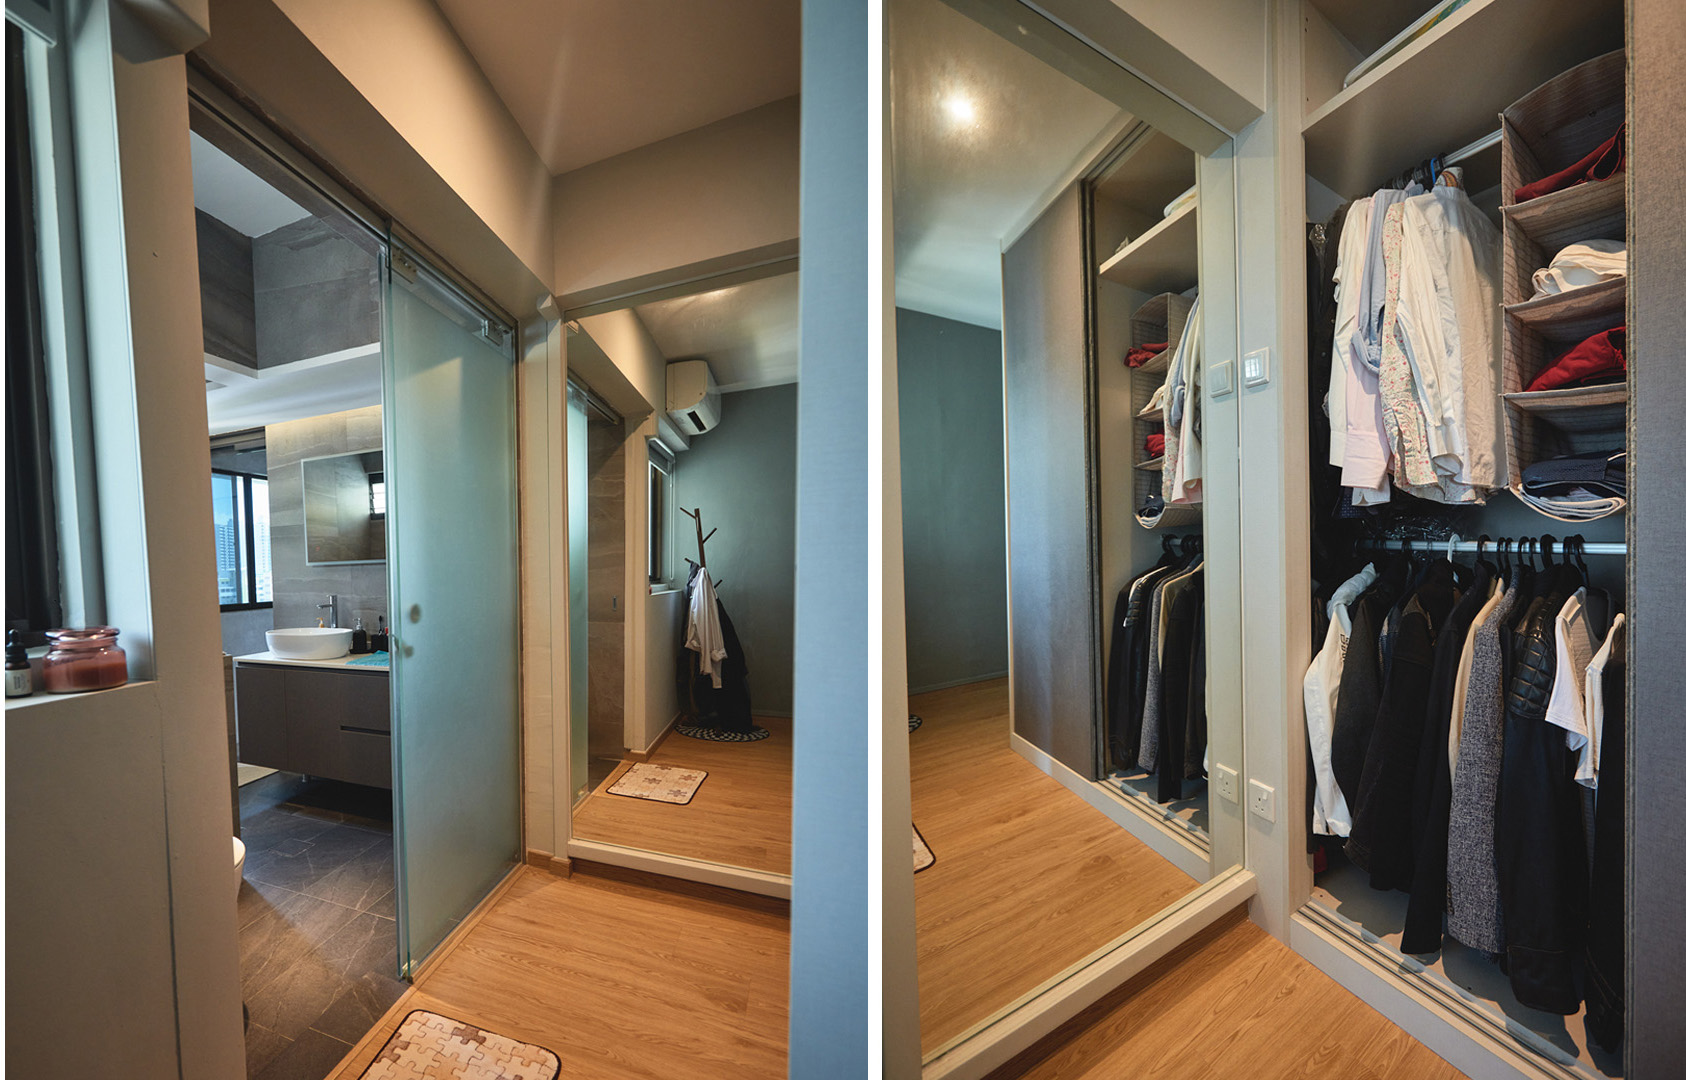 The modest walk-in wardrobe is located just before entry into the ensuite bathroom